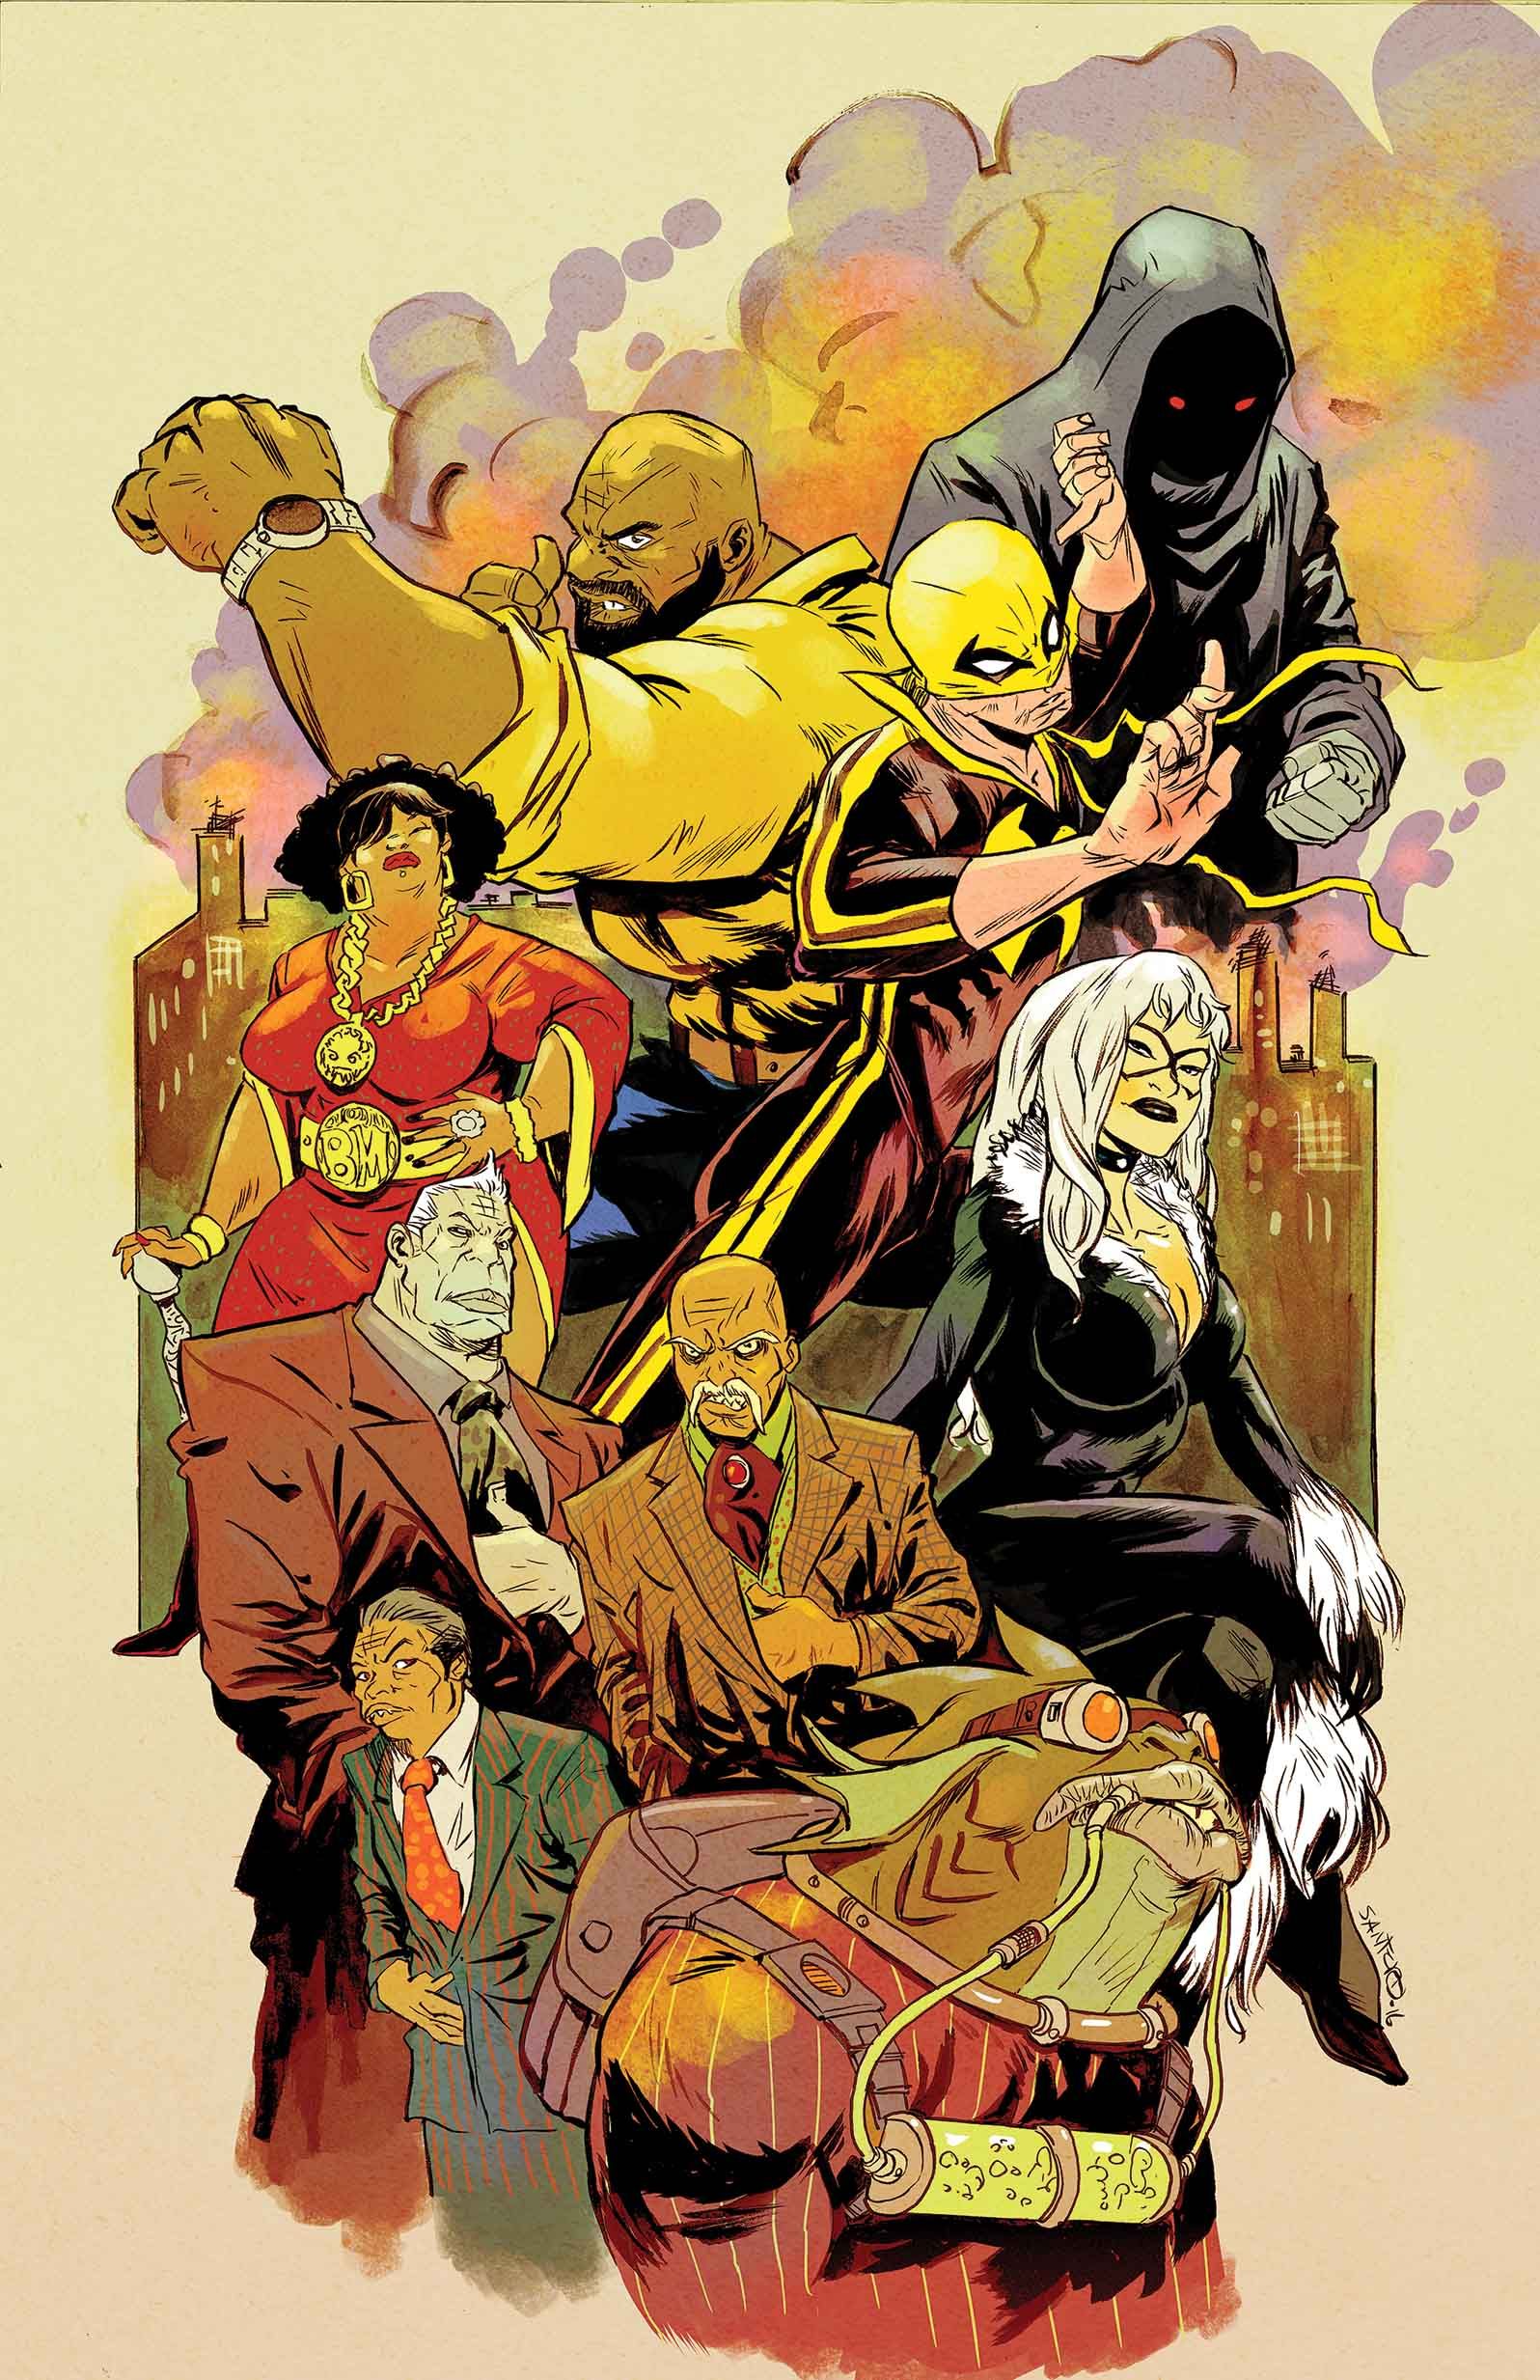 Power Man and Iron Fist #10 cover by Sanford Greene